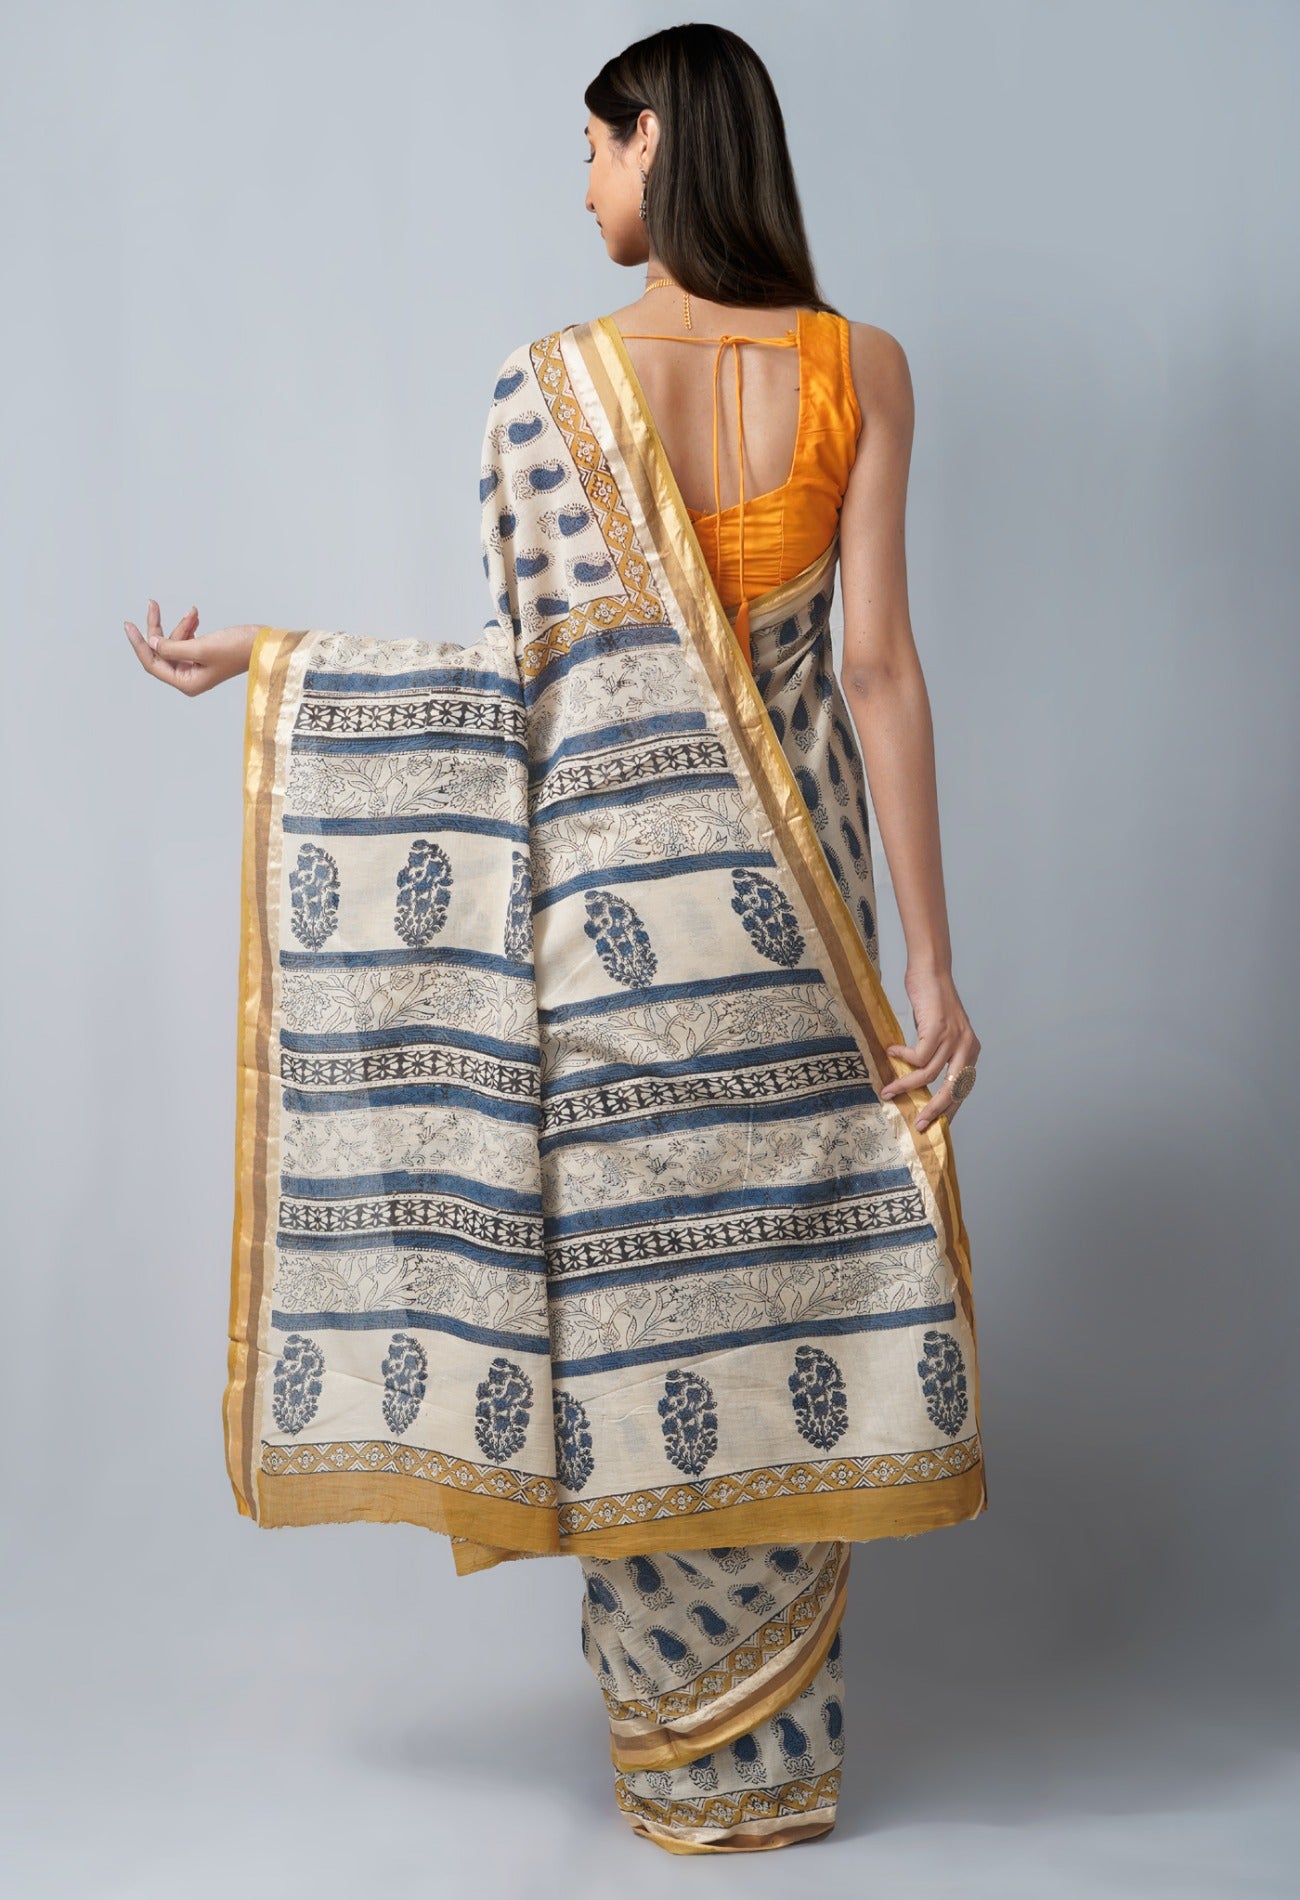 Online Shopping for Beige Pure Block Printed Superfine Mulmul Cotton Saree with Hand Block Prints from Rajasthan at Unnatisilks.com India
